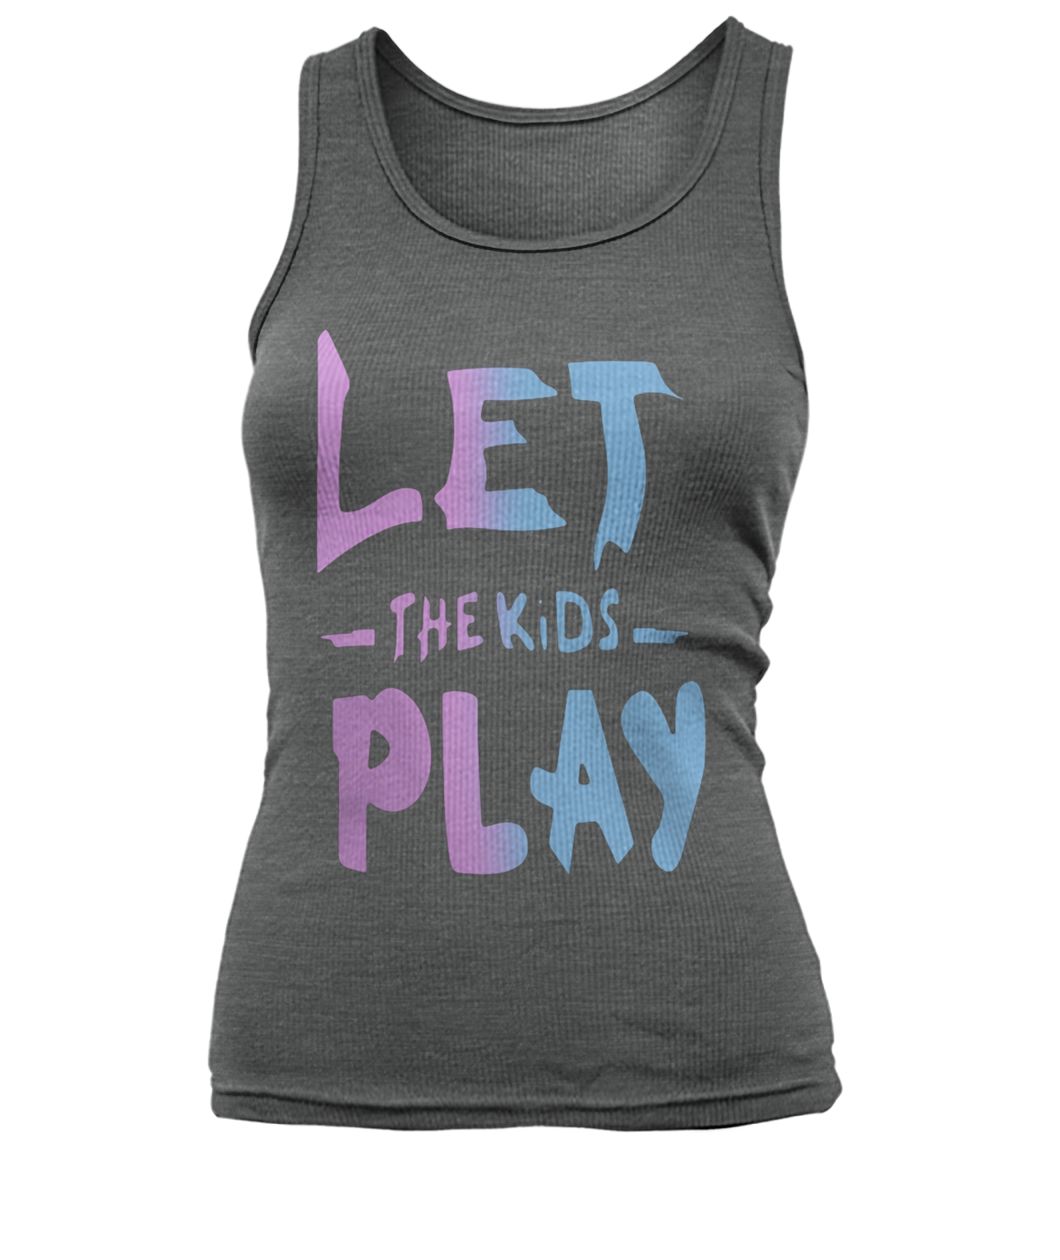 Let the kids play women's tank top